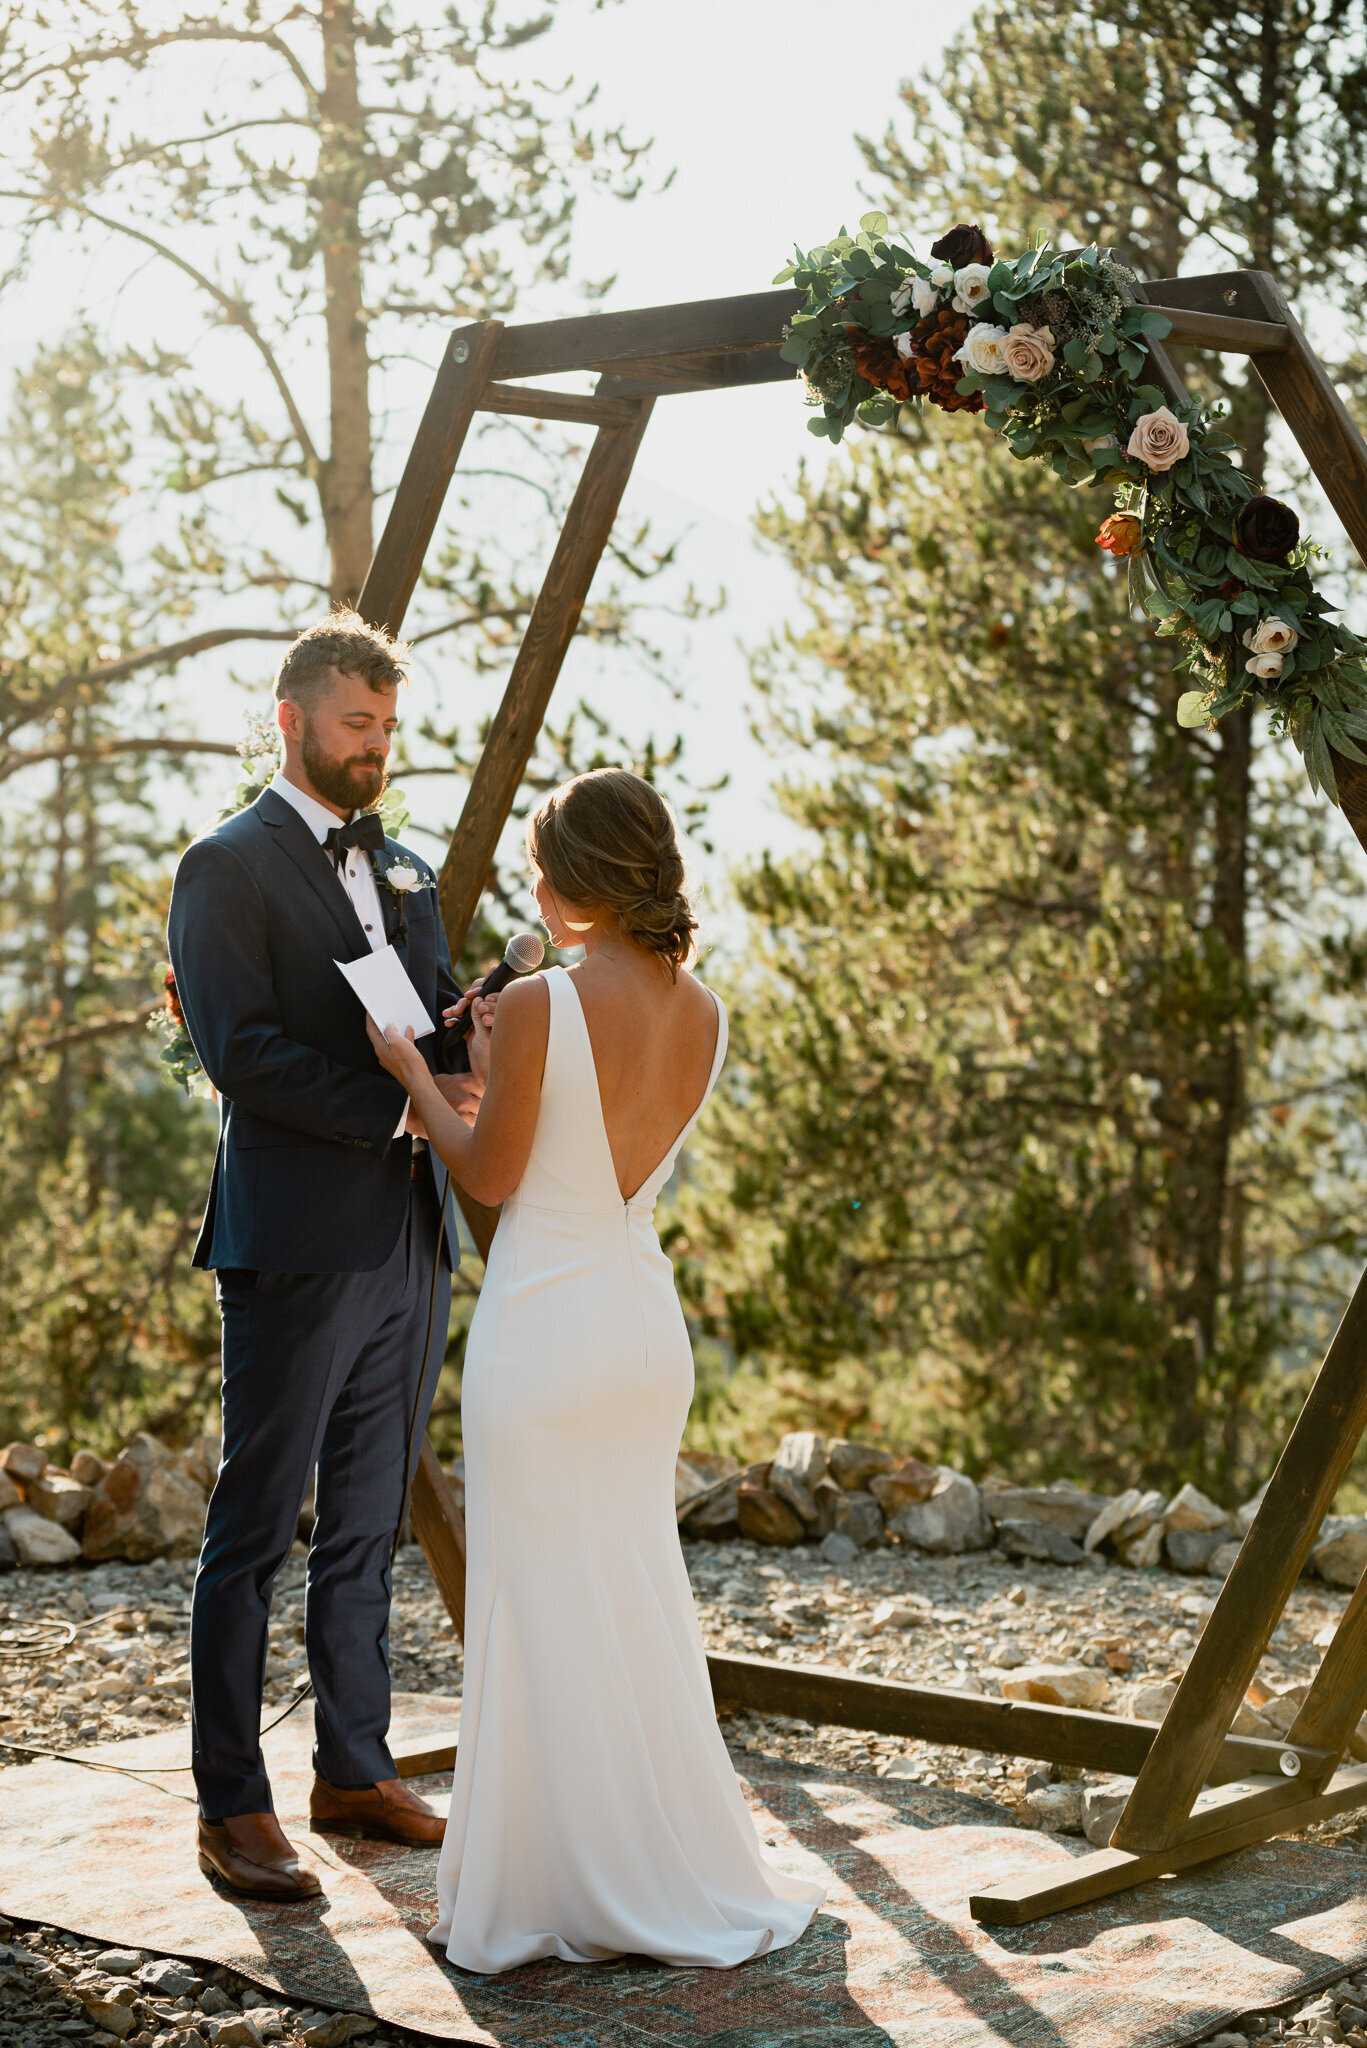 Professional photograph of bride and groom saying their vows at an outdoor alter.